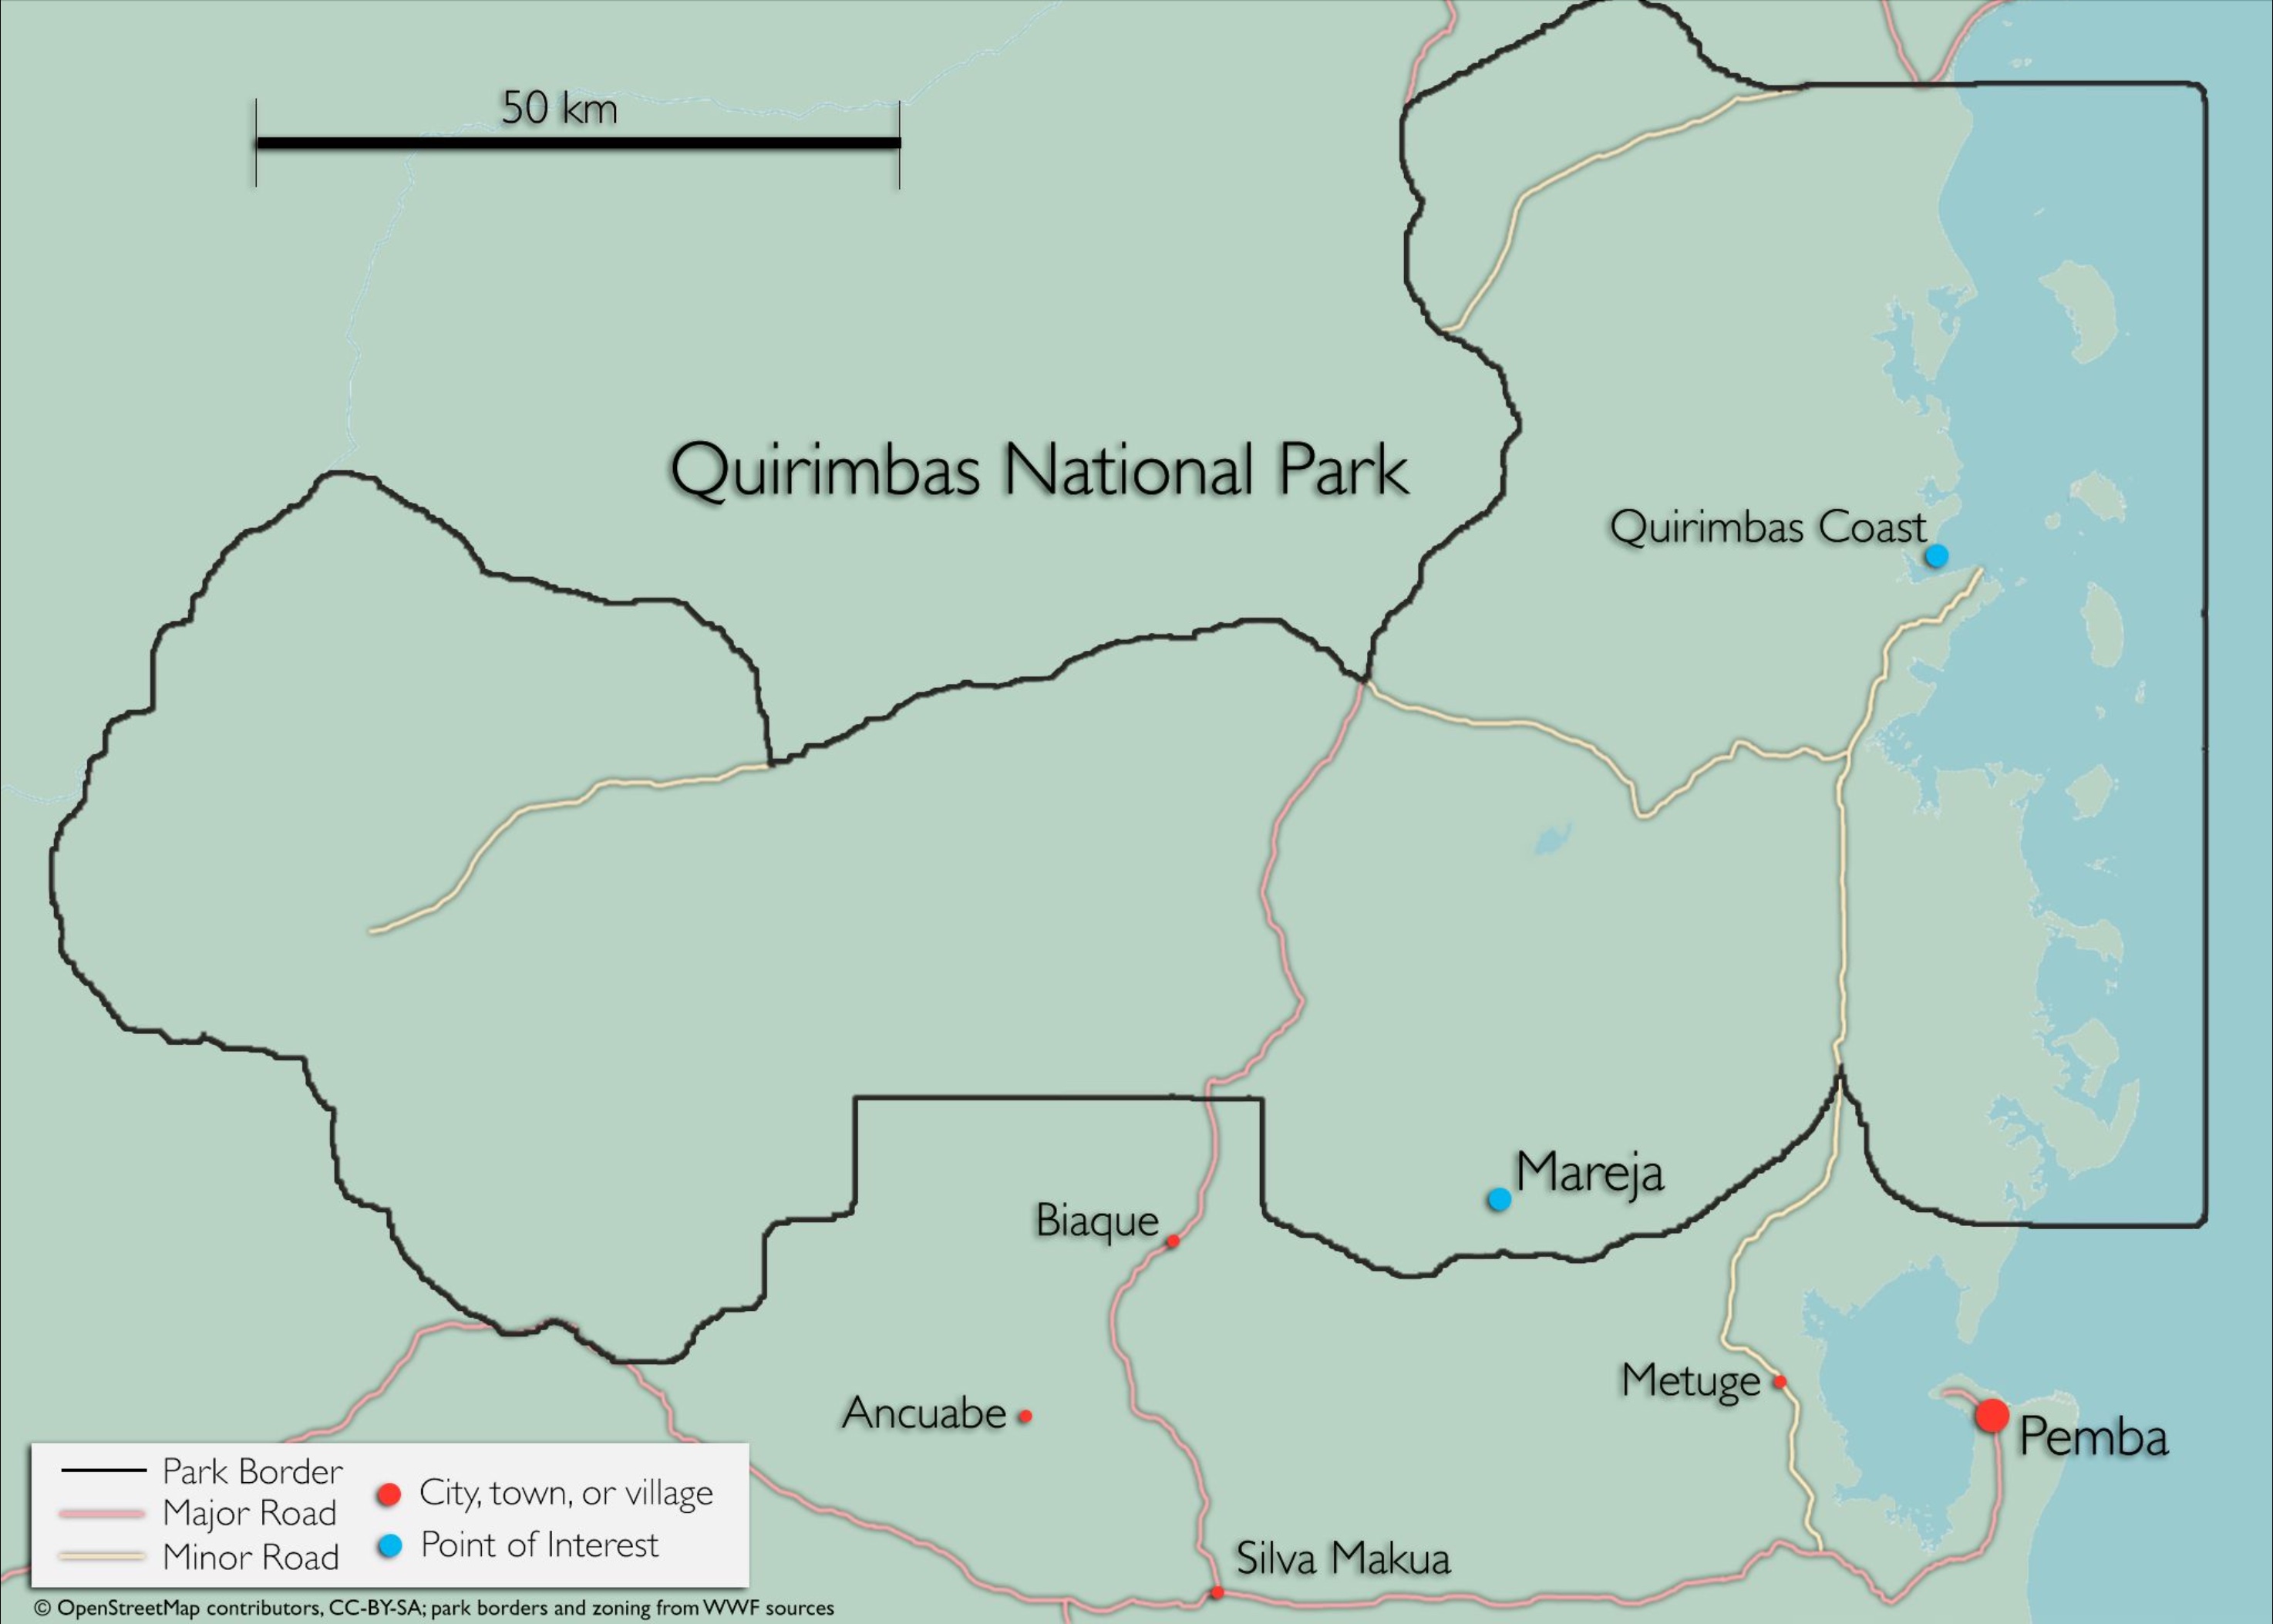 The Quirimbas National Park (QNP) is a protected area in the Cabo Delgado Province of Mozambique, encompassing the southern part of the Quirimbas Islands, as well as a significant mainland area. The park was established in June 2002.